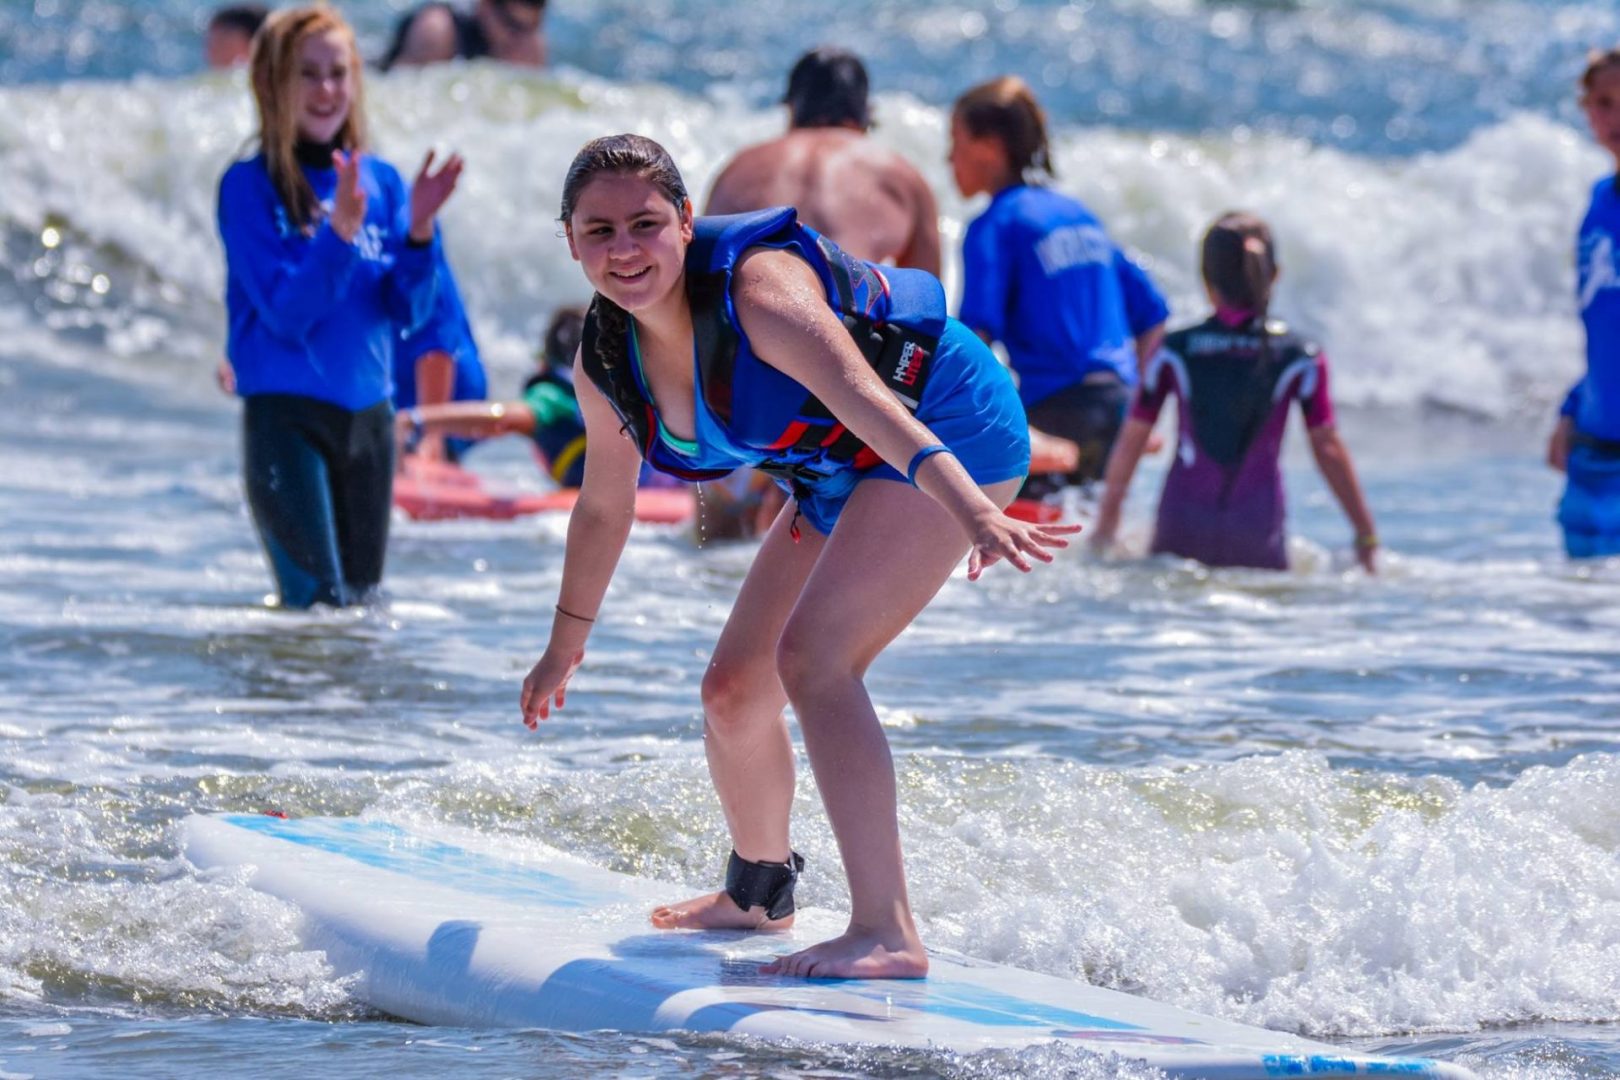 Lots of athletes and coaches in the water with large waves. Photo is focused on one athlete who is standing on her surfboard. She is wearing a life vest. Her knees are slightly bent and she is riding towards the shore with the wave. A coach in the background is clapping for her.